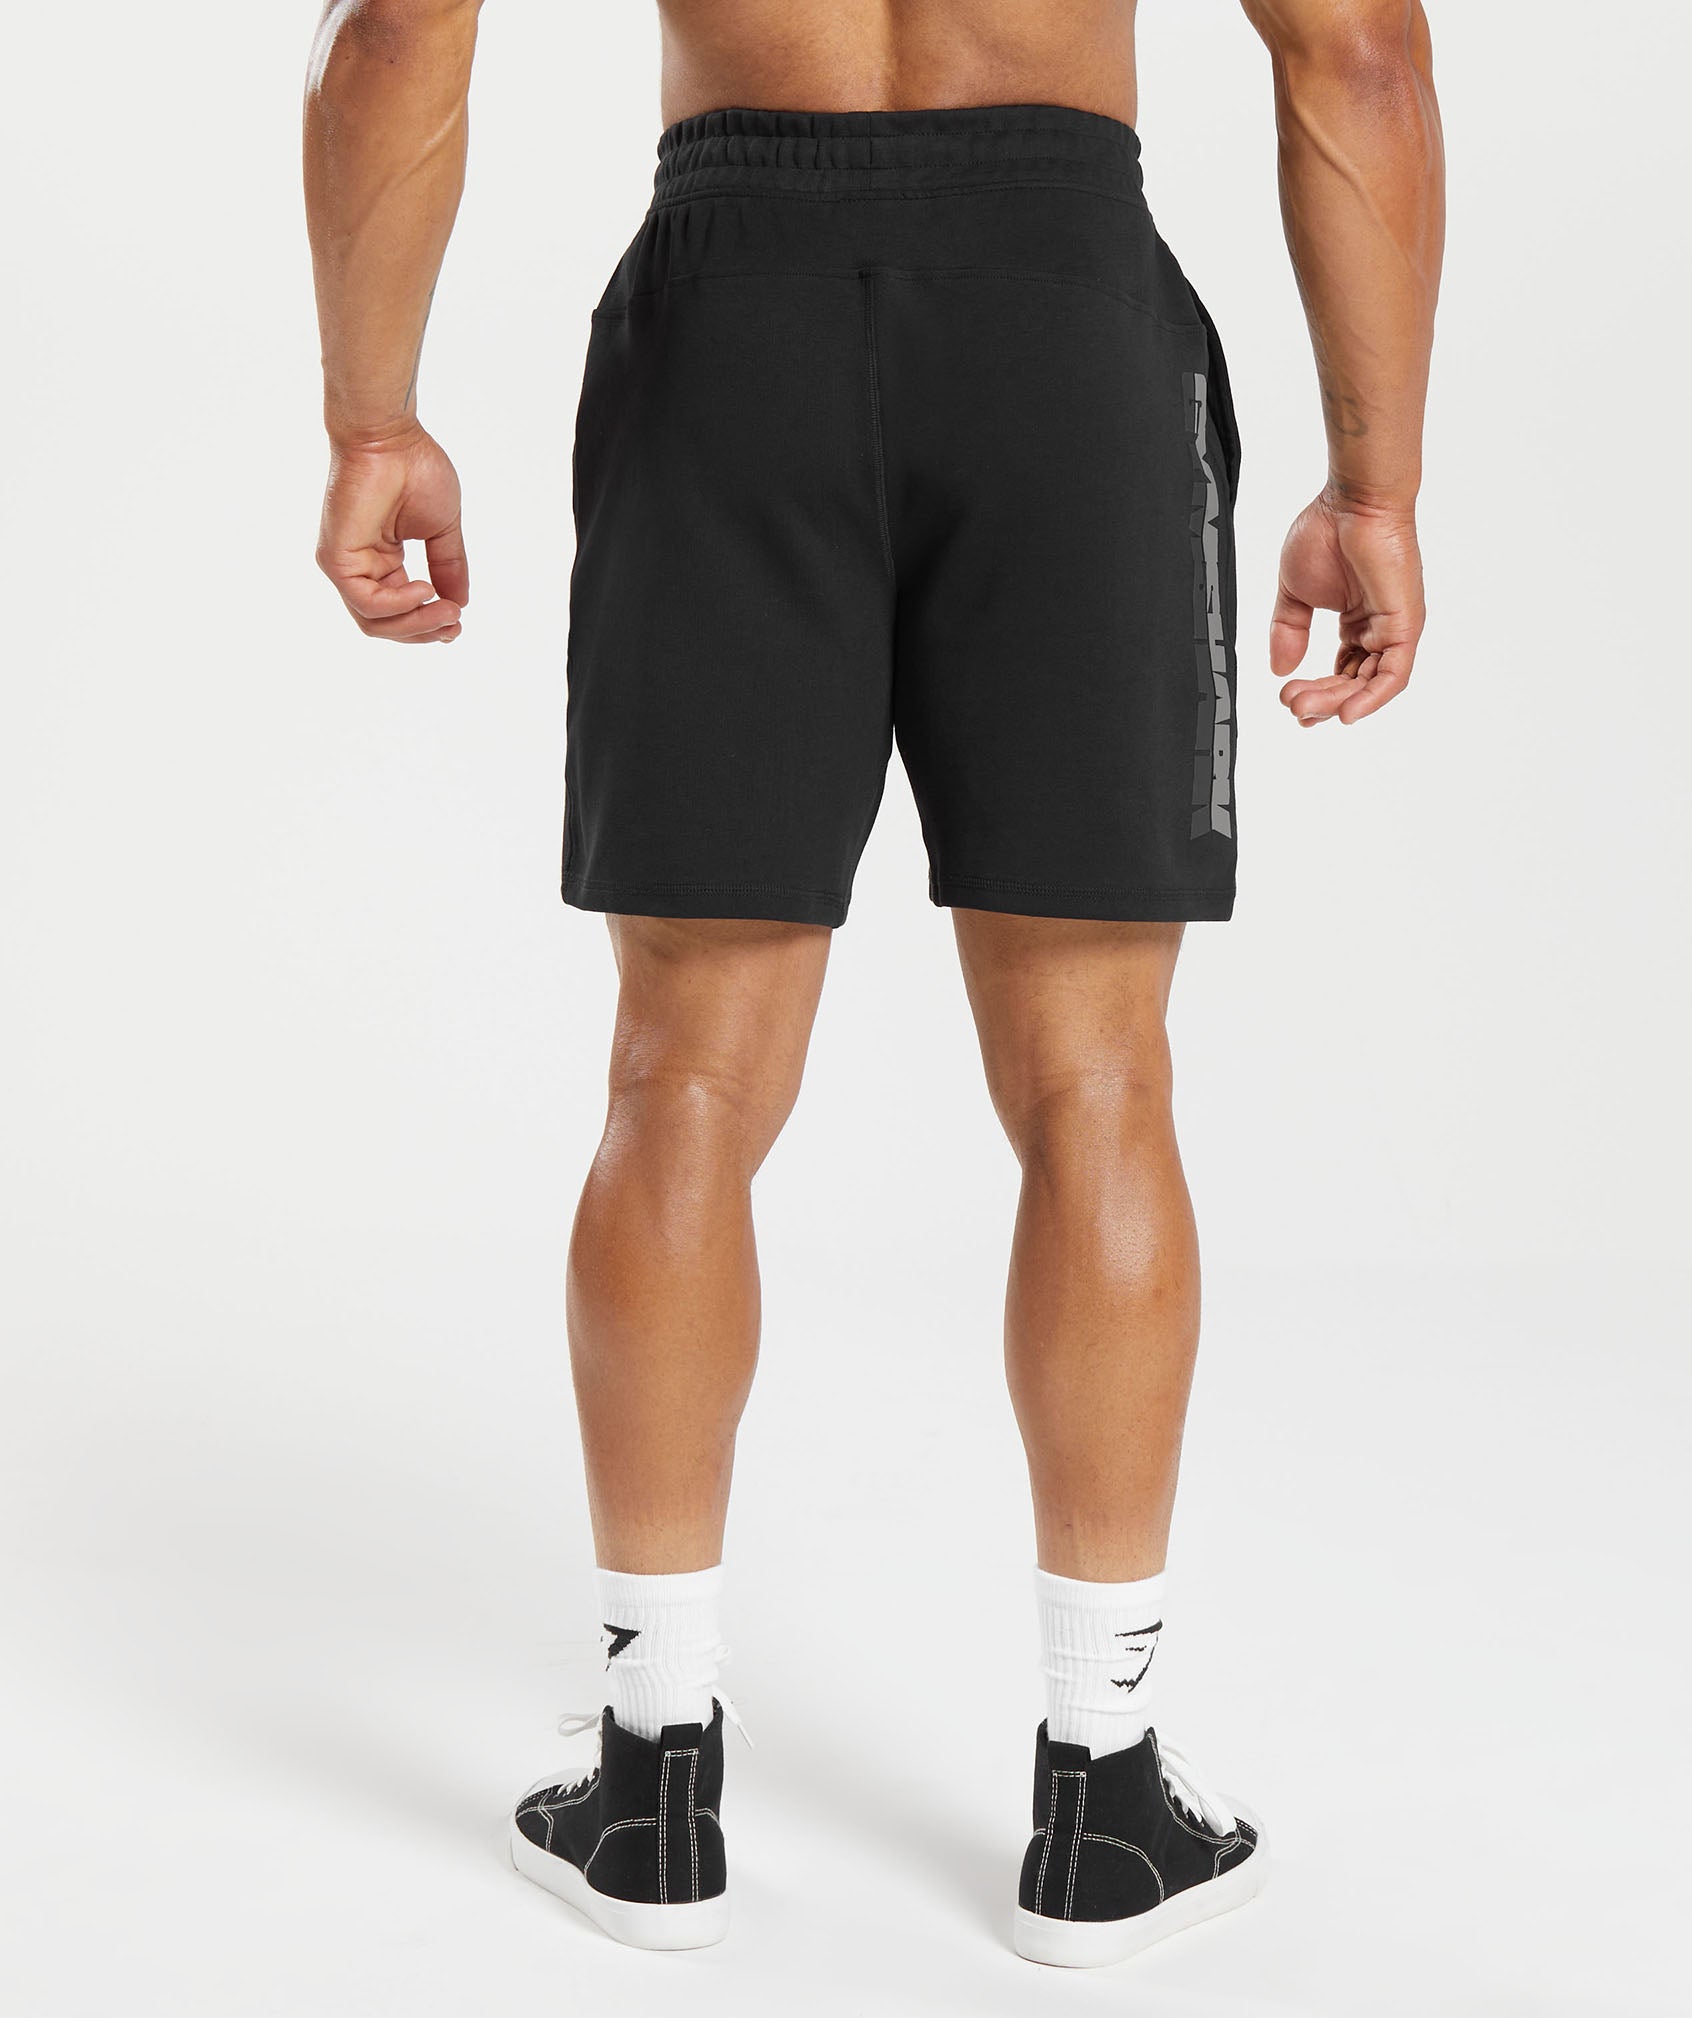 Bold 7" Shorts in Black - view 7